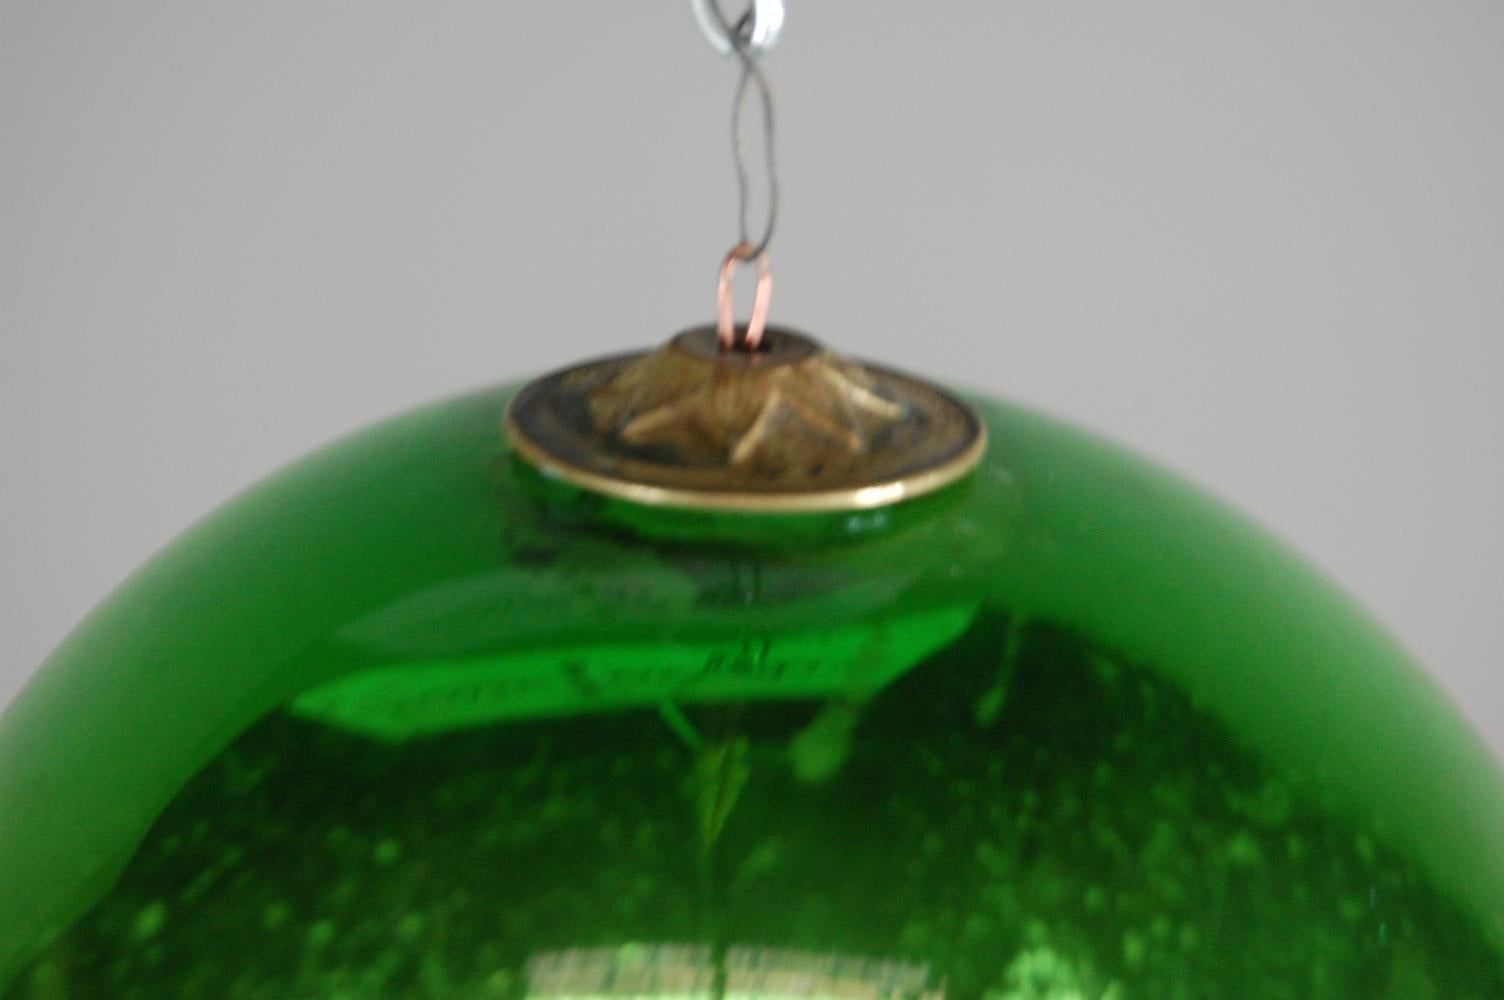 Heavily foxed original Mercury glass witches ball, Rare green colour, wonderful condition with dramatic heavy foxing, France, circa 1880.